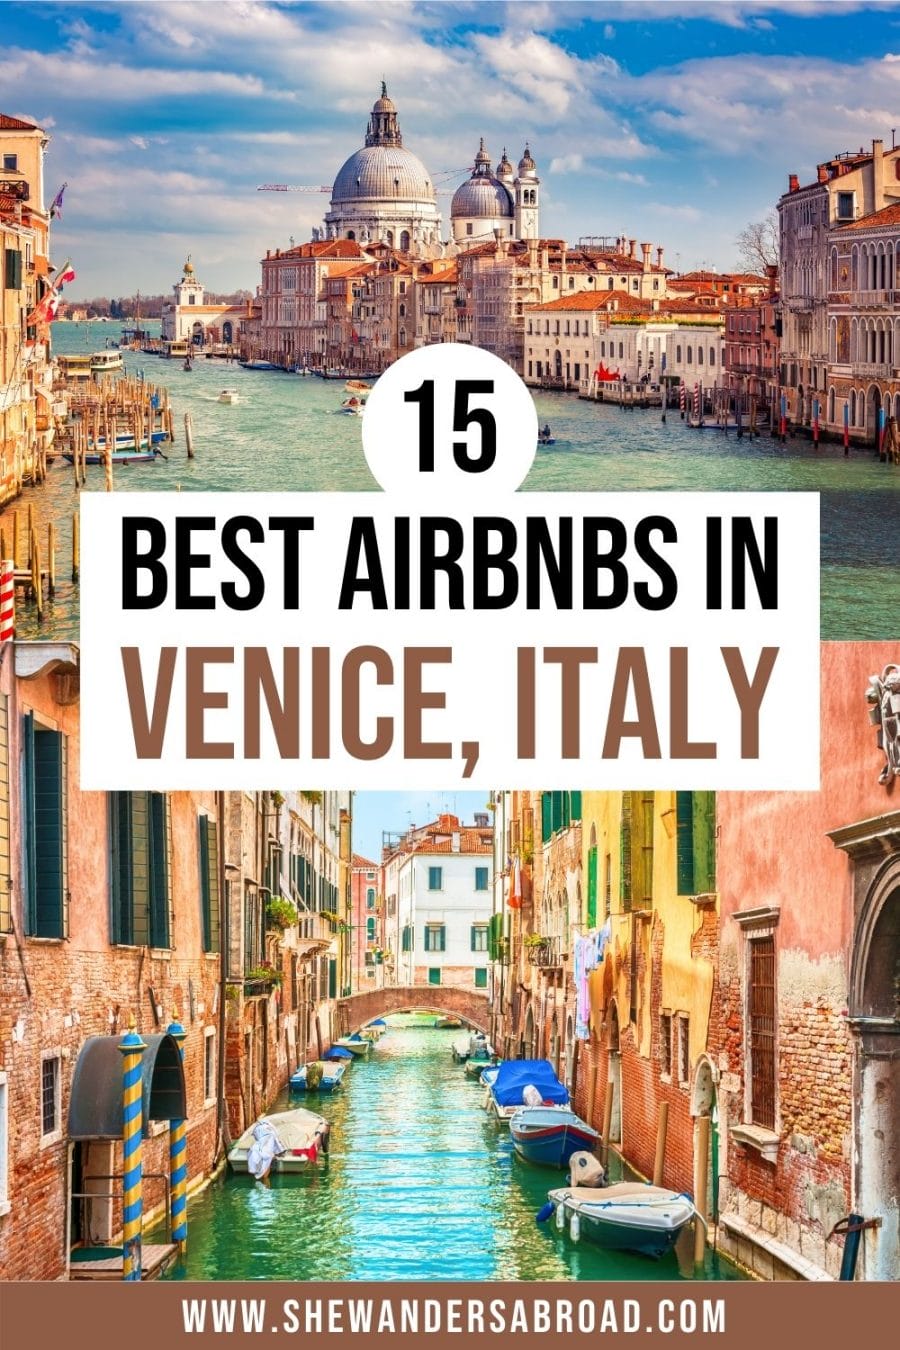 Best Airbnbs in Venice, Italy